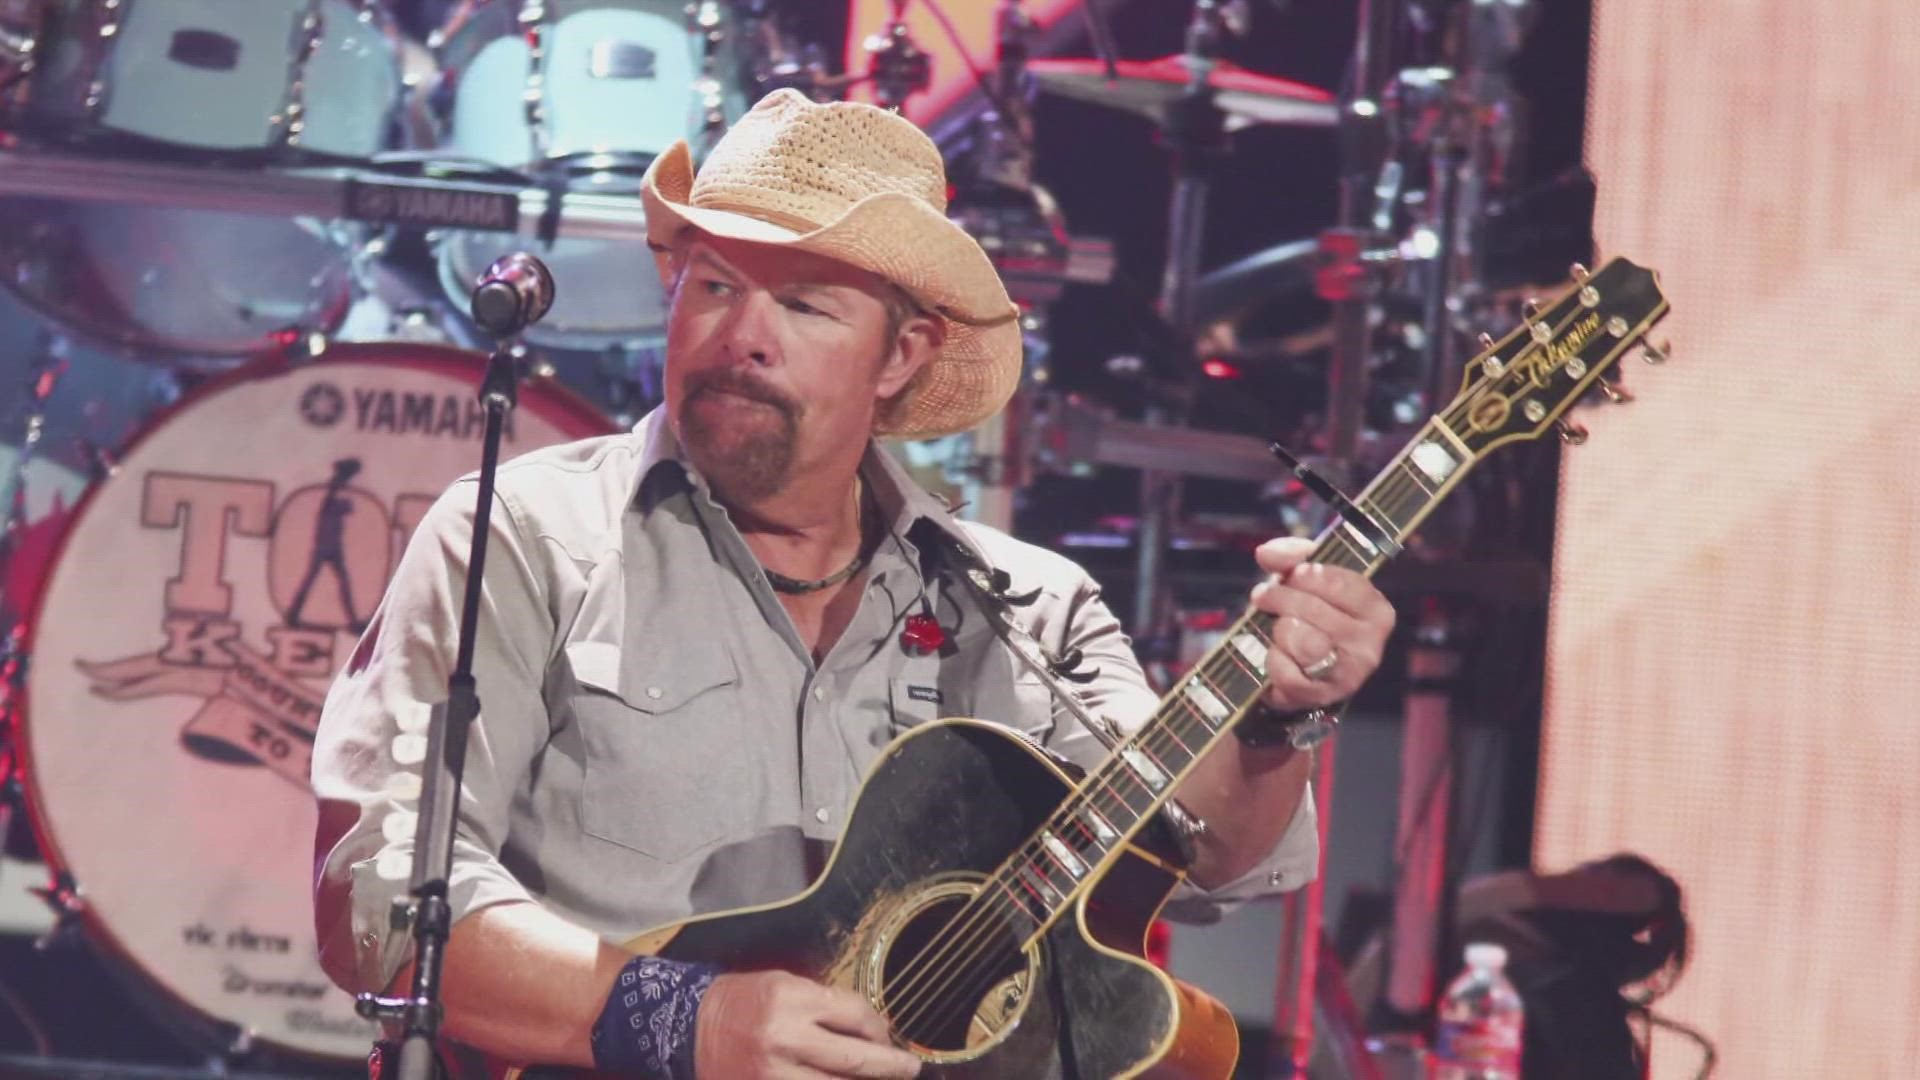 Toby Keith revealed he's been battling stomach cancer for months after his diagnosis last fall.